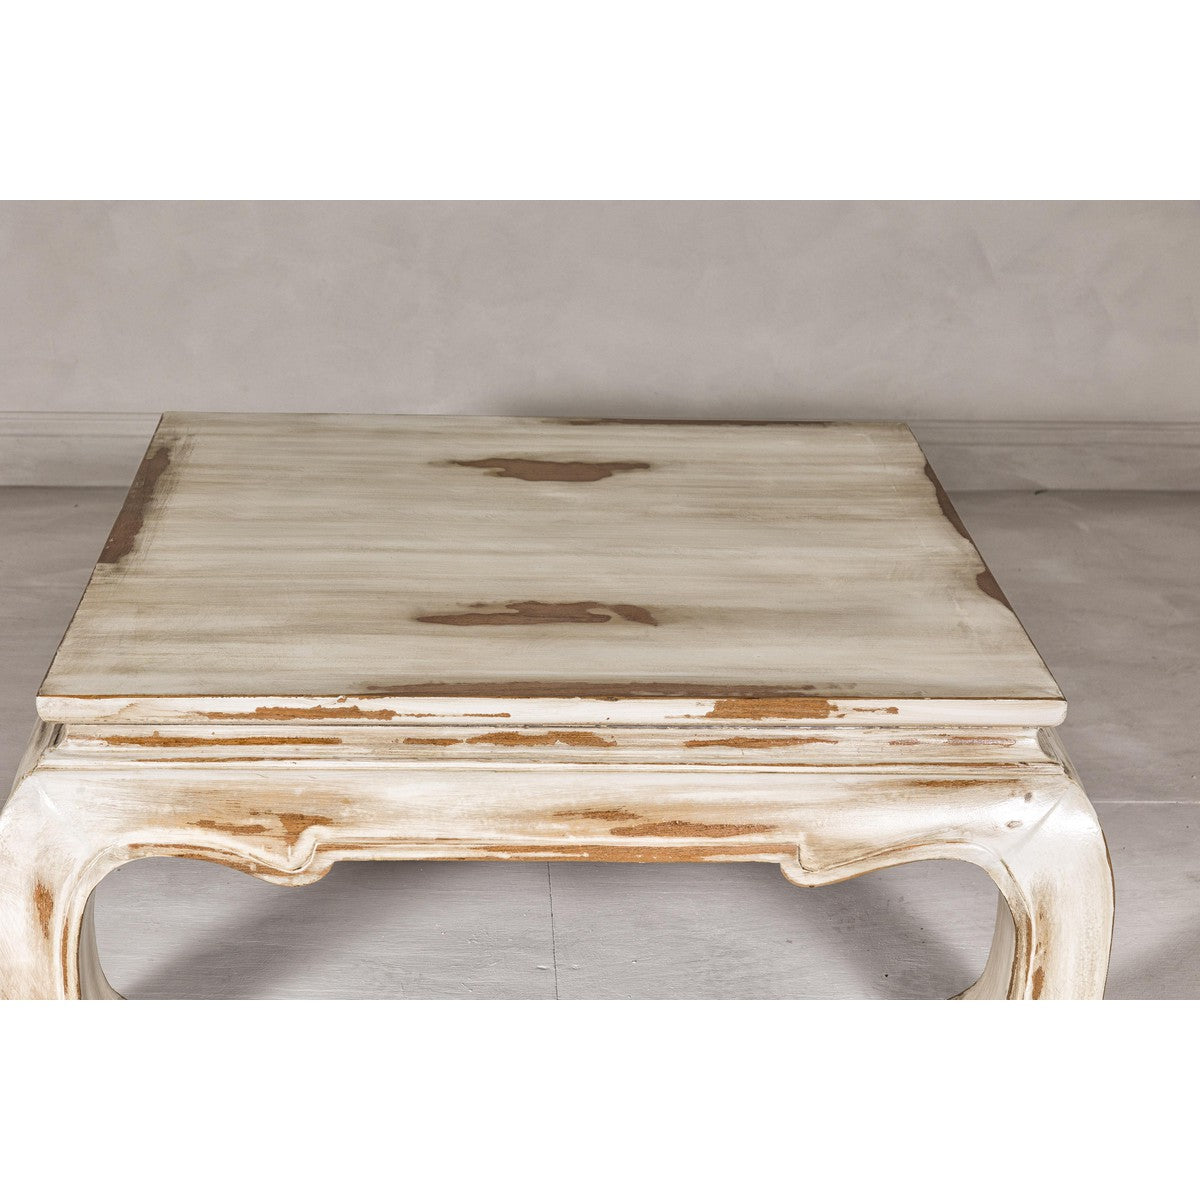 Distressed White Coffee Table with Chow Legs and Square Top, Vintage-YN7957-7. Asian & Chinese Furniture, Art, Antiques, Vintage Home Décor for sale at FEA Home